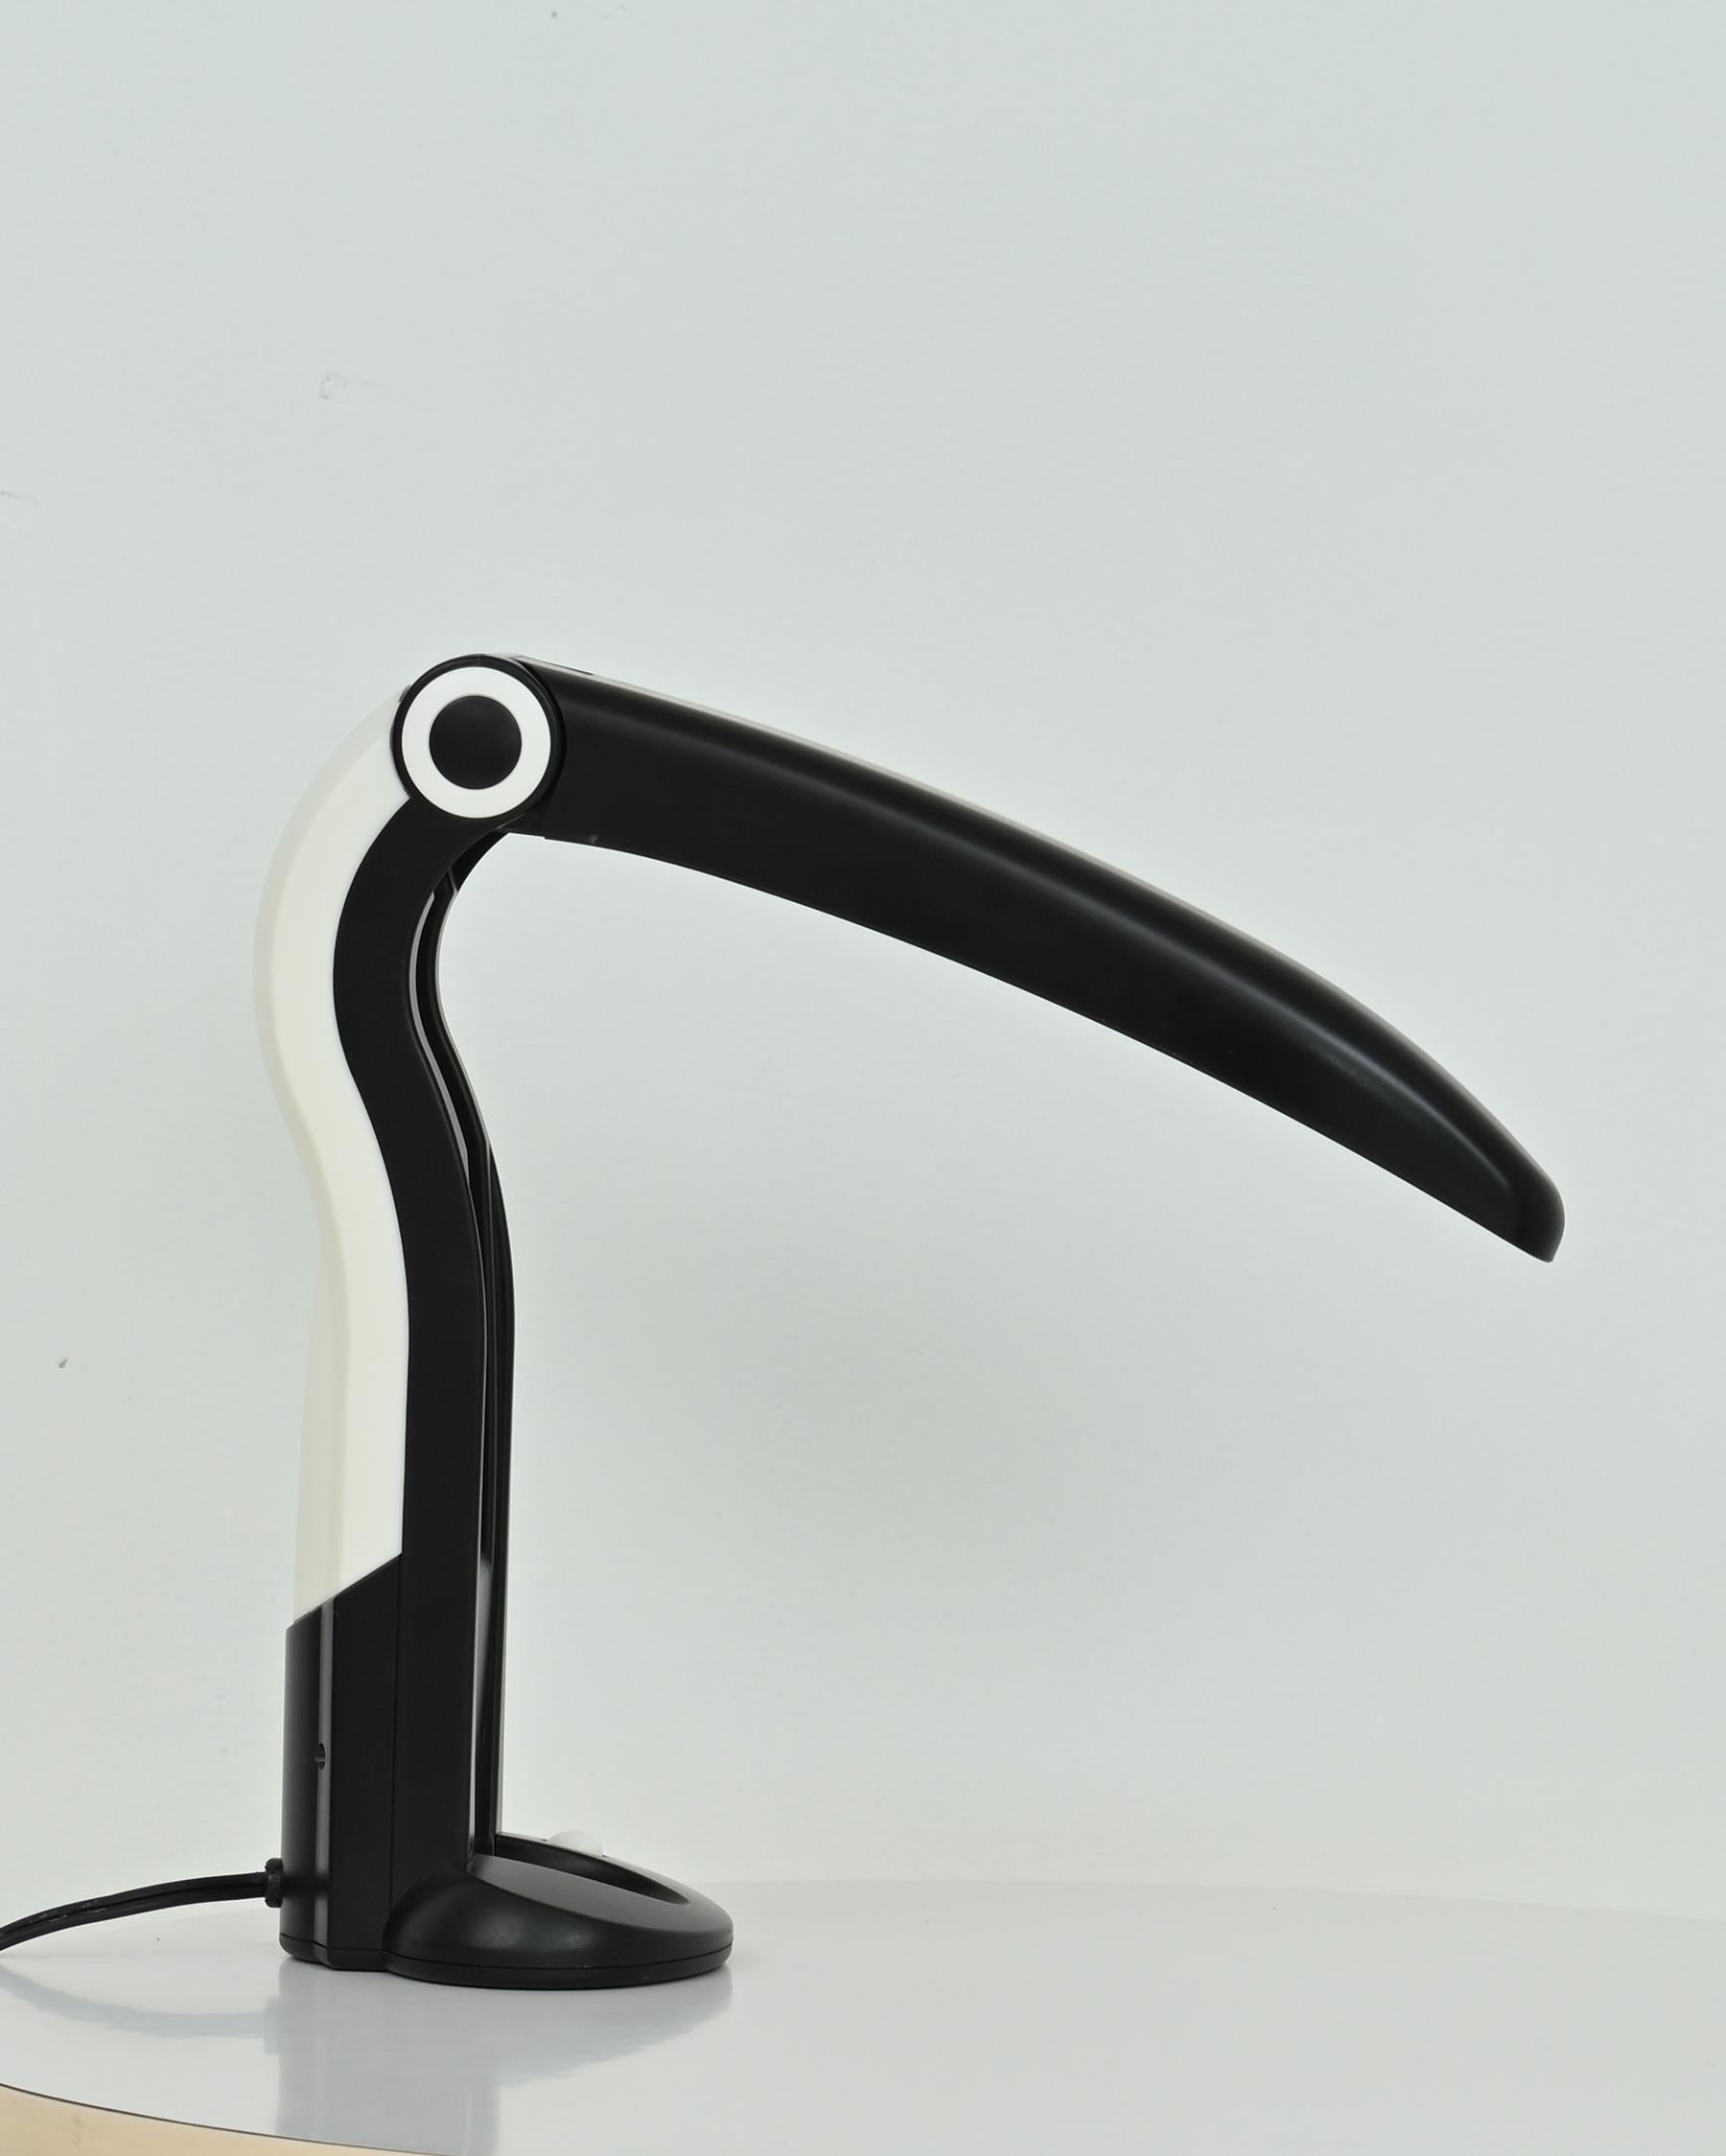 Adorable, beautiful table lamp designed by H.T. Huang for Huangslite in the 1990s. Very good vintage condition and well. The bird’s beak is adjustable. Includes fluorescent bulb. Made in Taiwan.
Recently seen throughout the Taiwan-based television